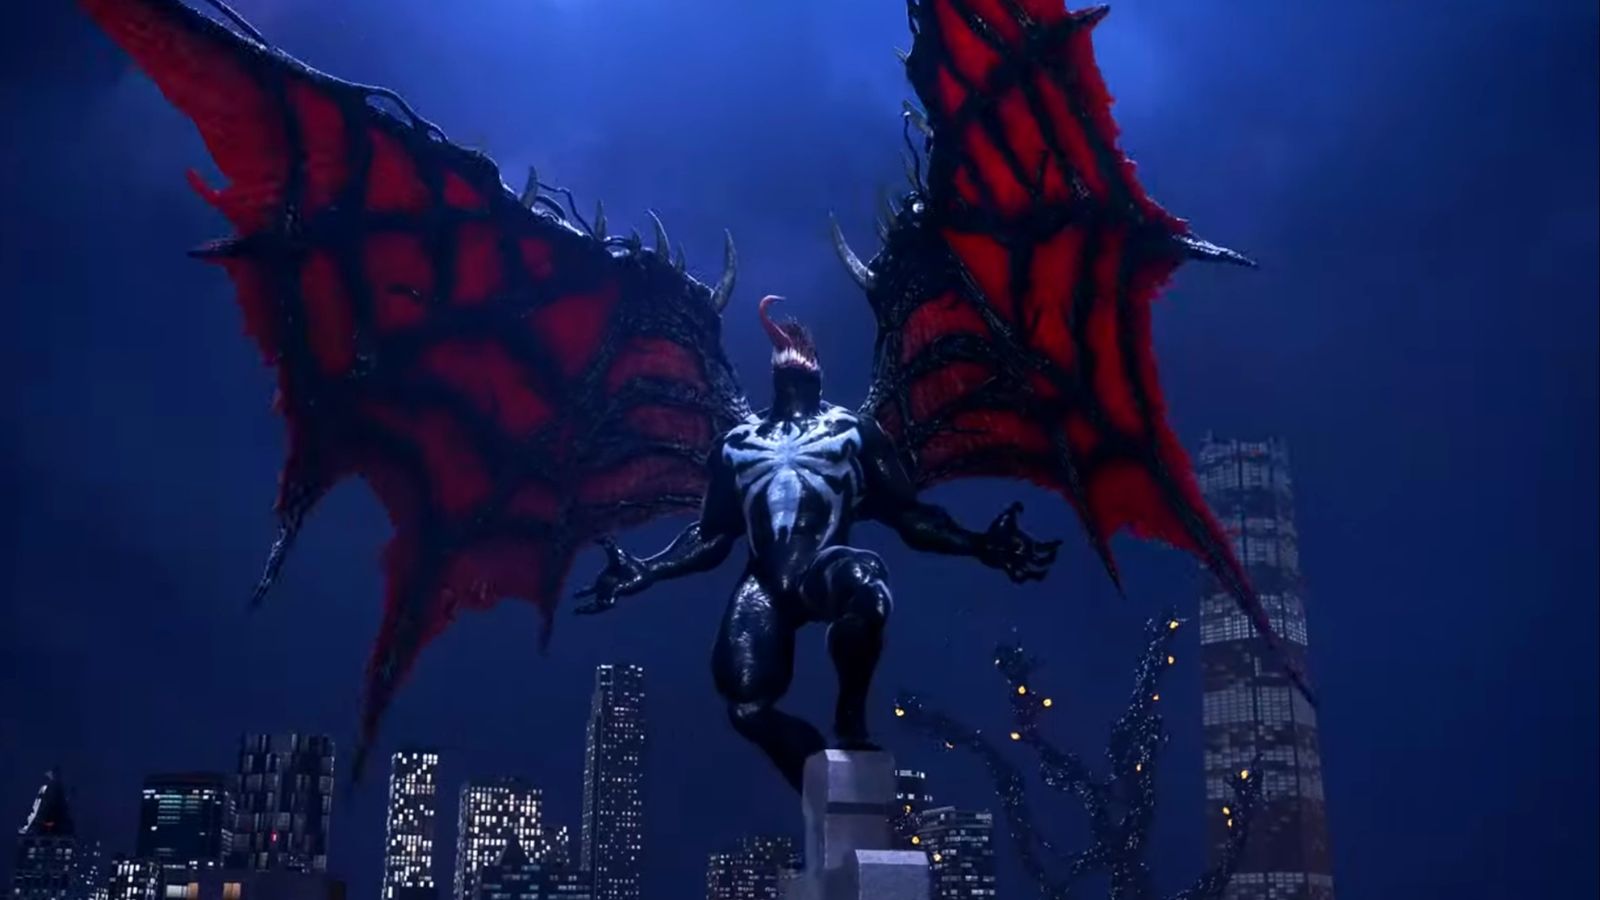 Spider-Man 2 Venom roaring with wings outstretched